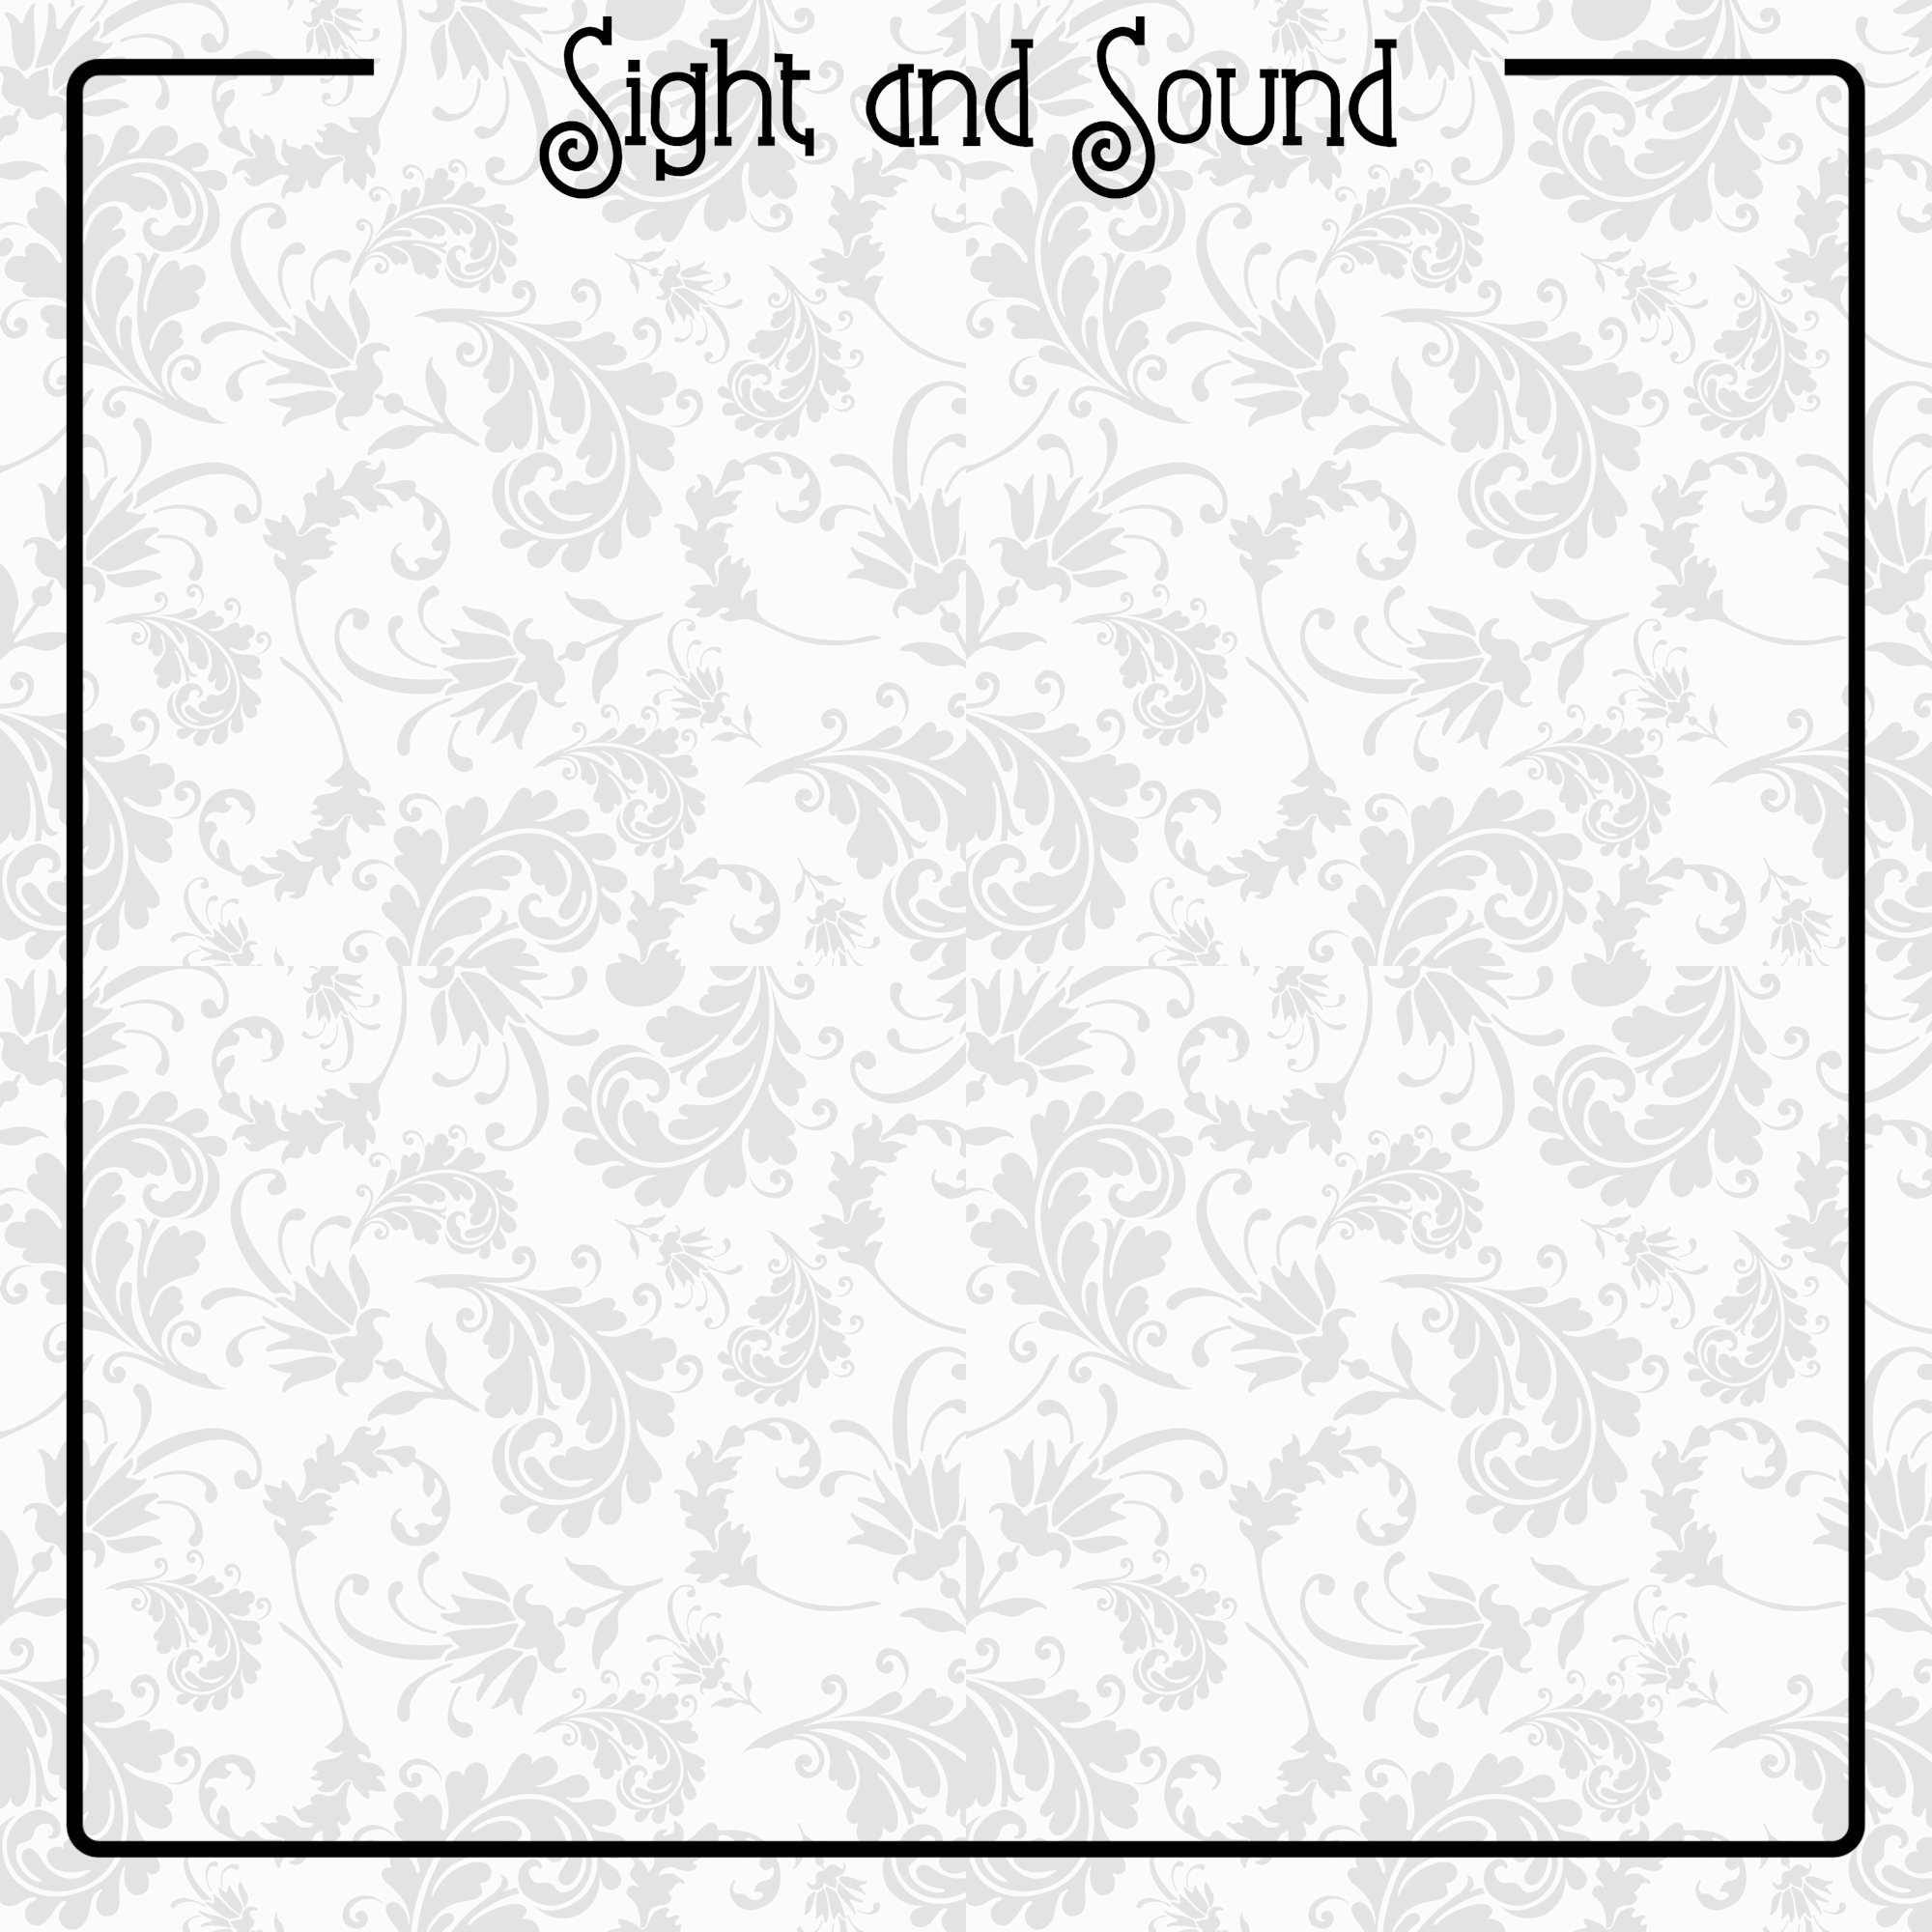 Branson, Missouri Collection Sight & Sound 12 x 12 Double-Sided Scrapbook Paper by SSC Designs